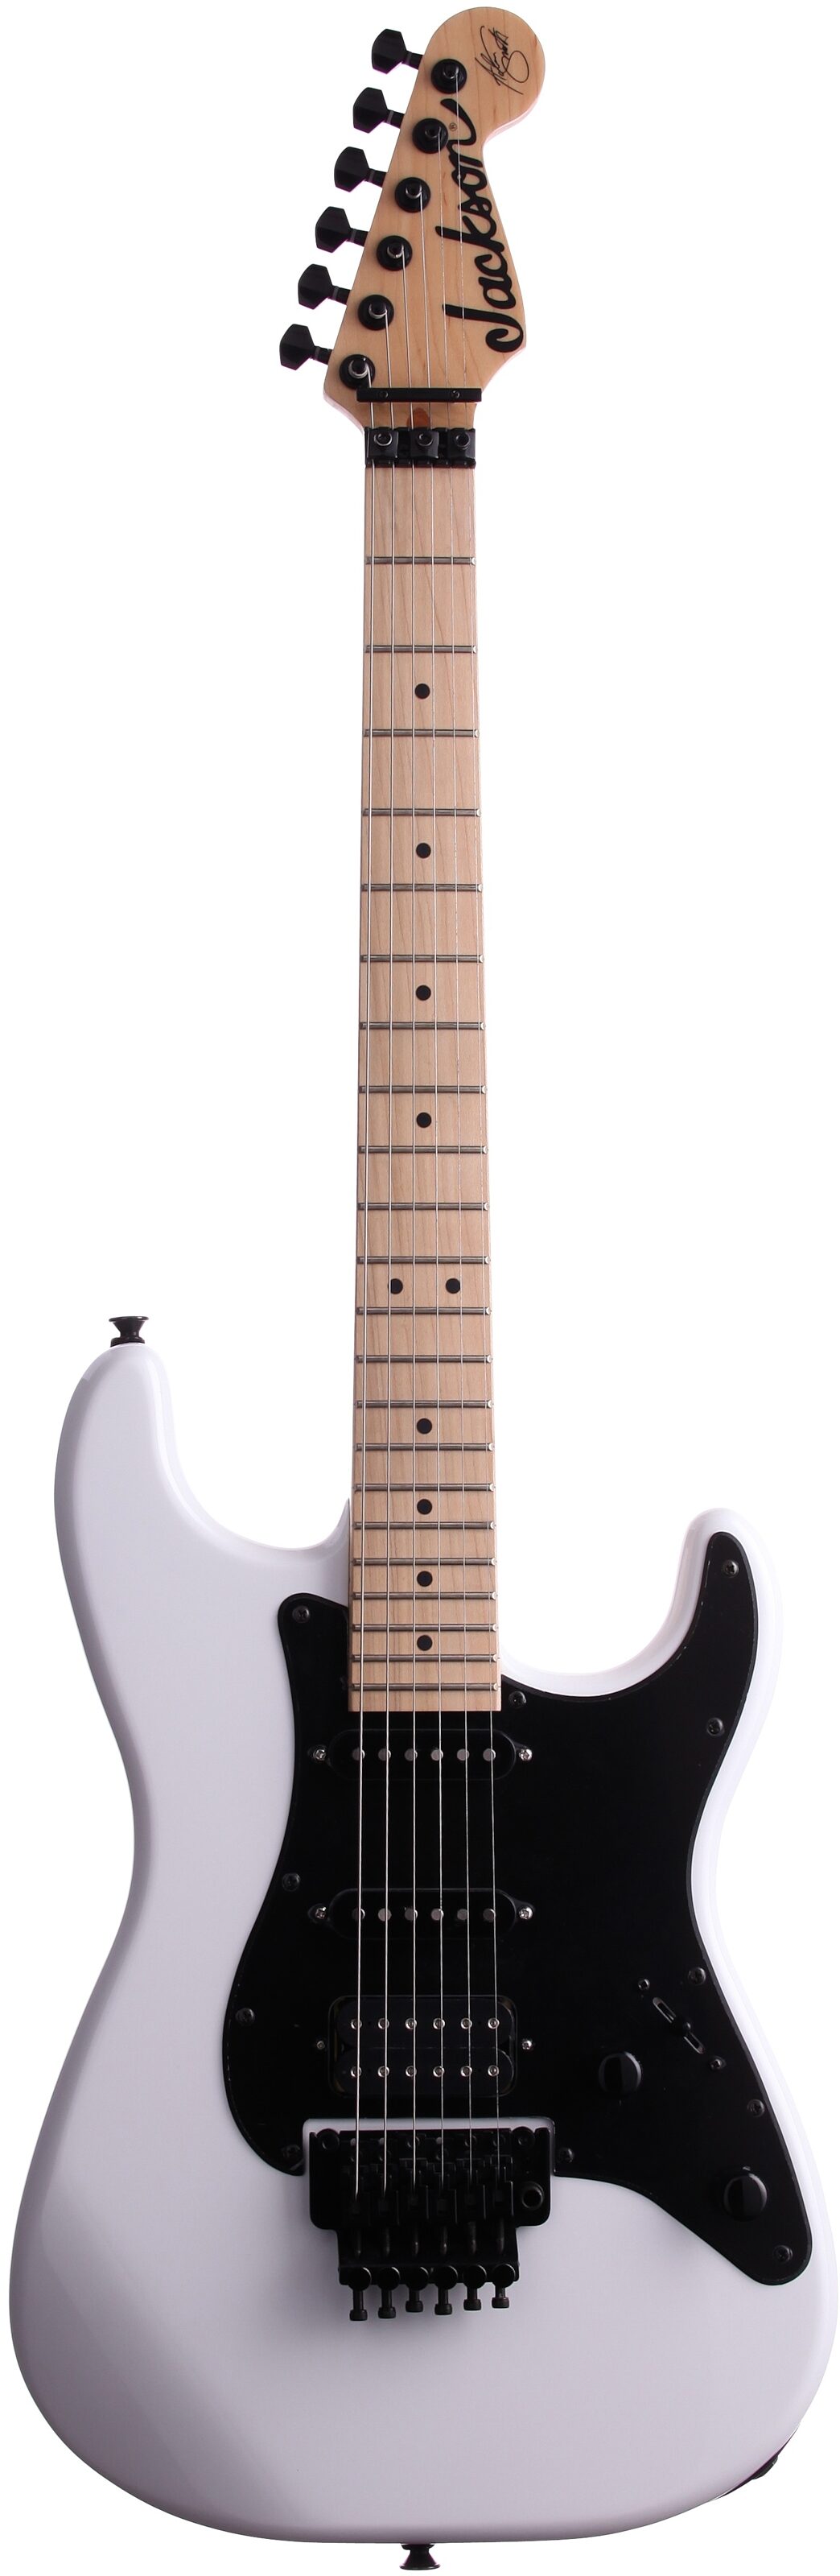 Collapse Assassin tire Jackson X Series Signature Adrian Smith SDX Electric Guitar, Maple  Fingerboard